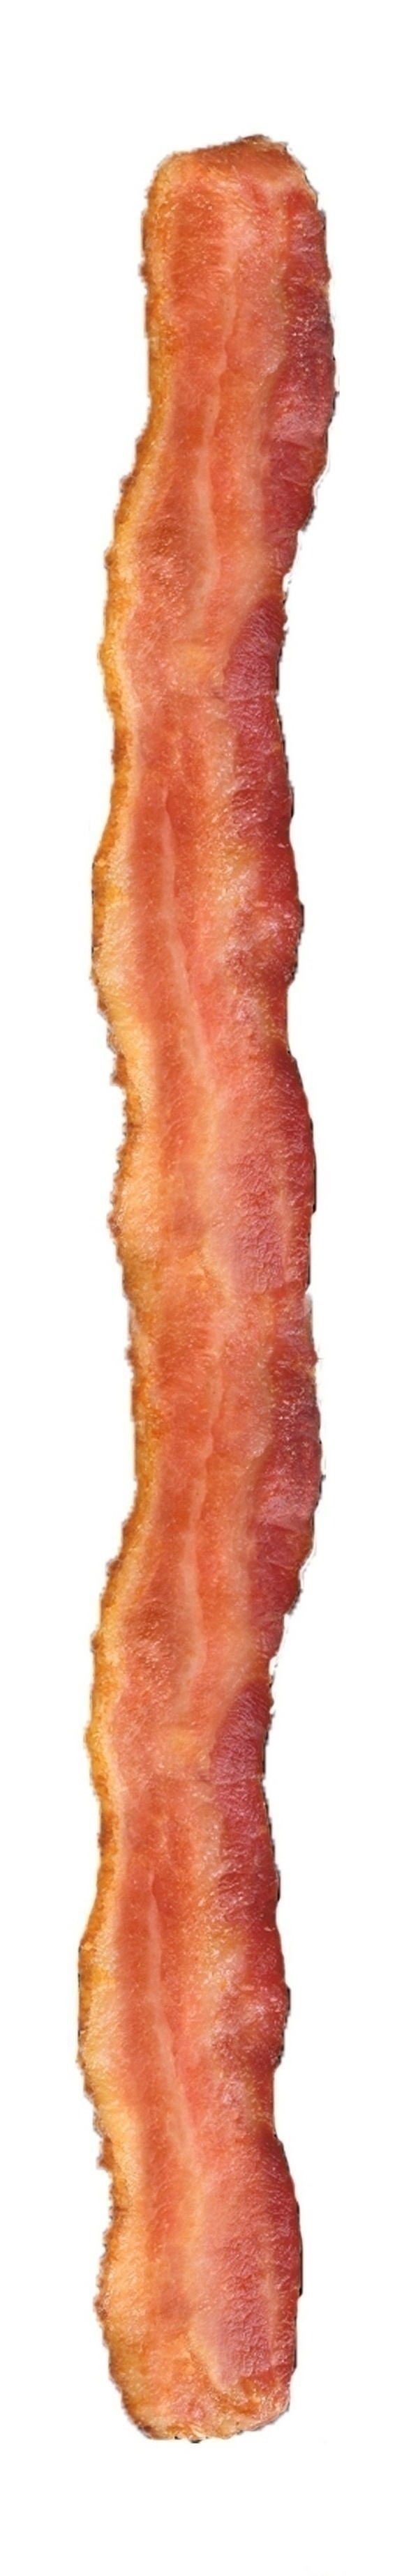 Bacon Strips PNG - 147581